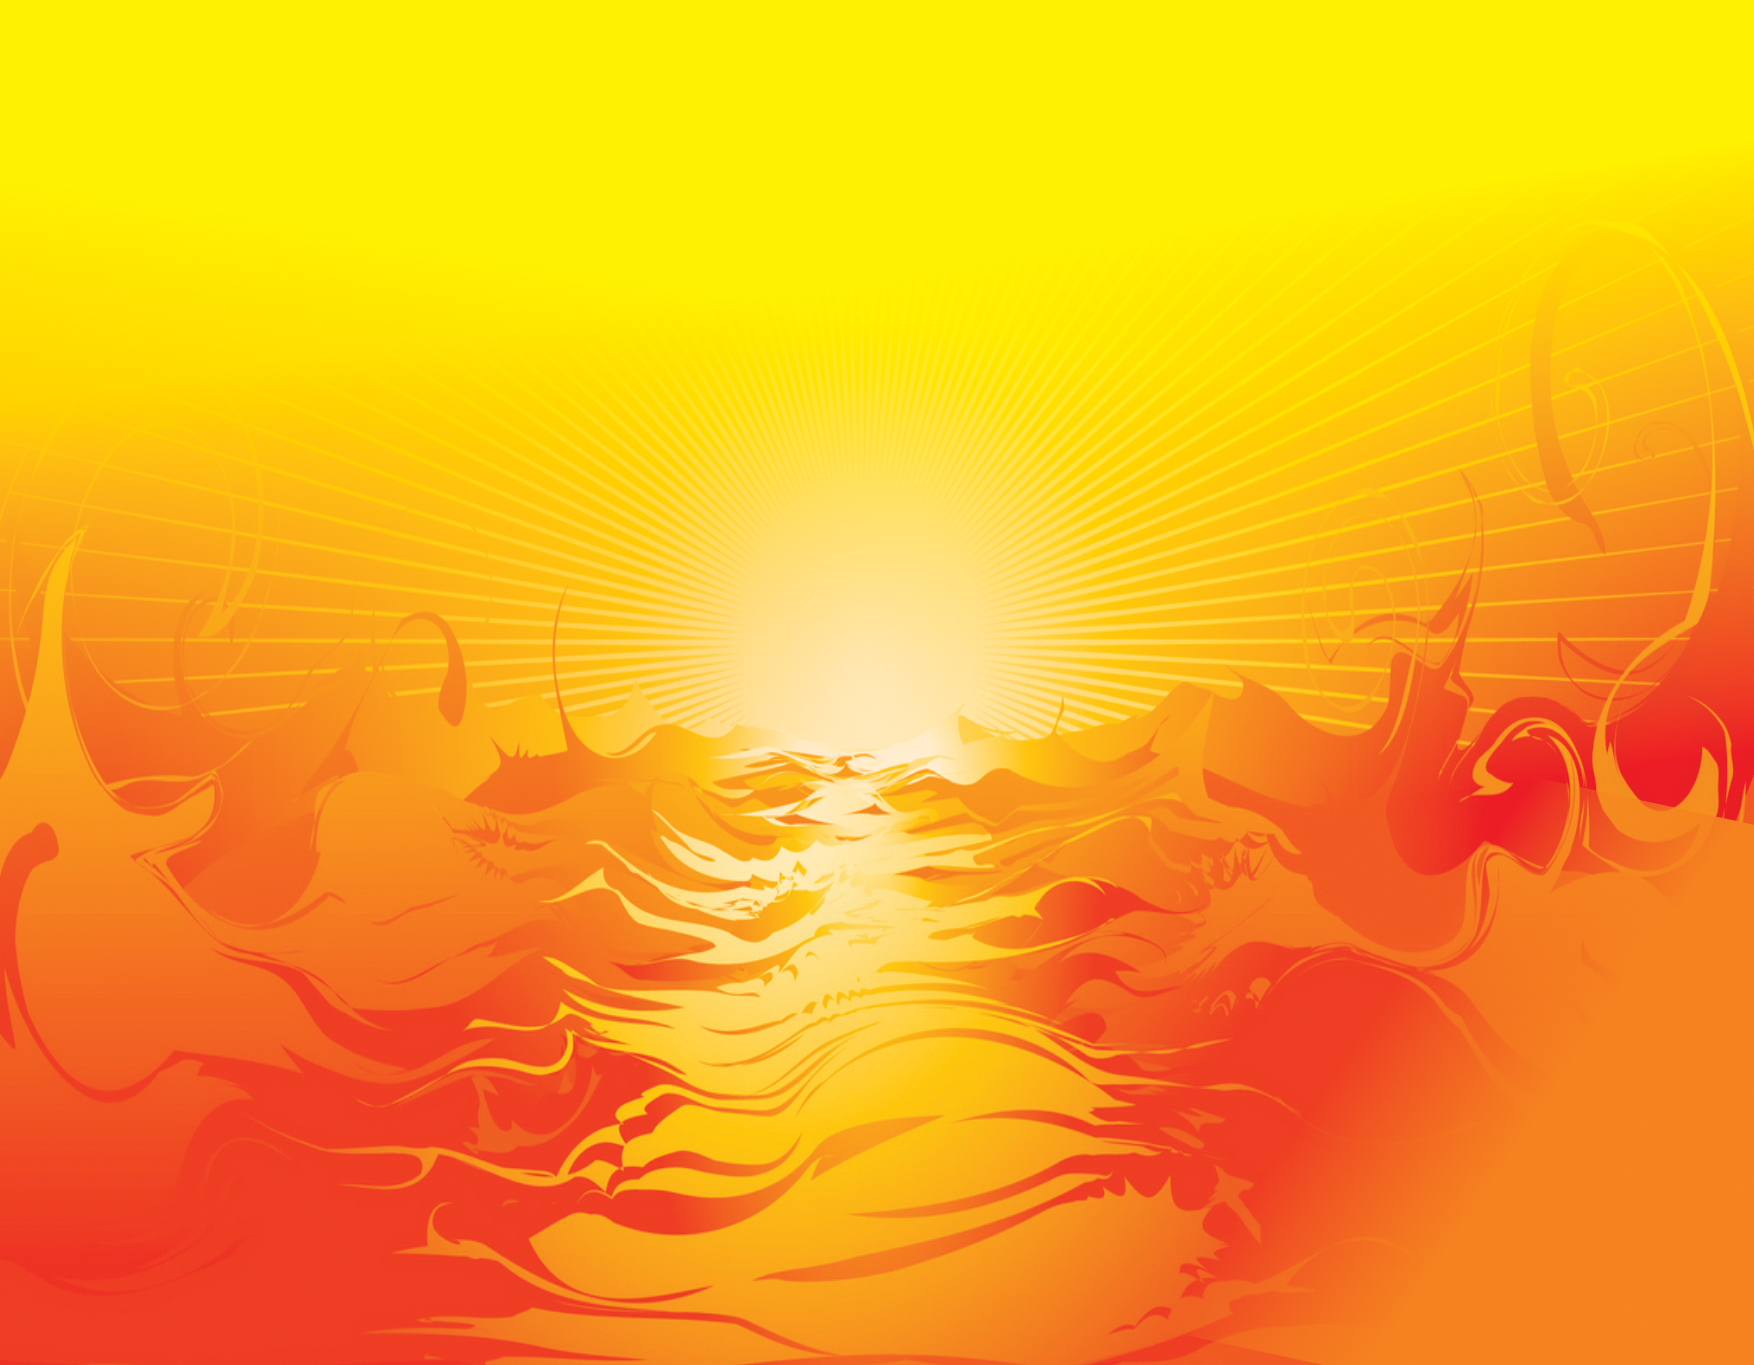 Chhath Puja Background PNG - FREE Vector Design - Cdr, Ai, EPS, PNG, SVG